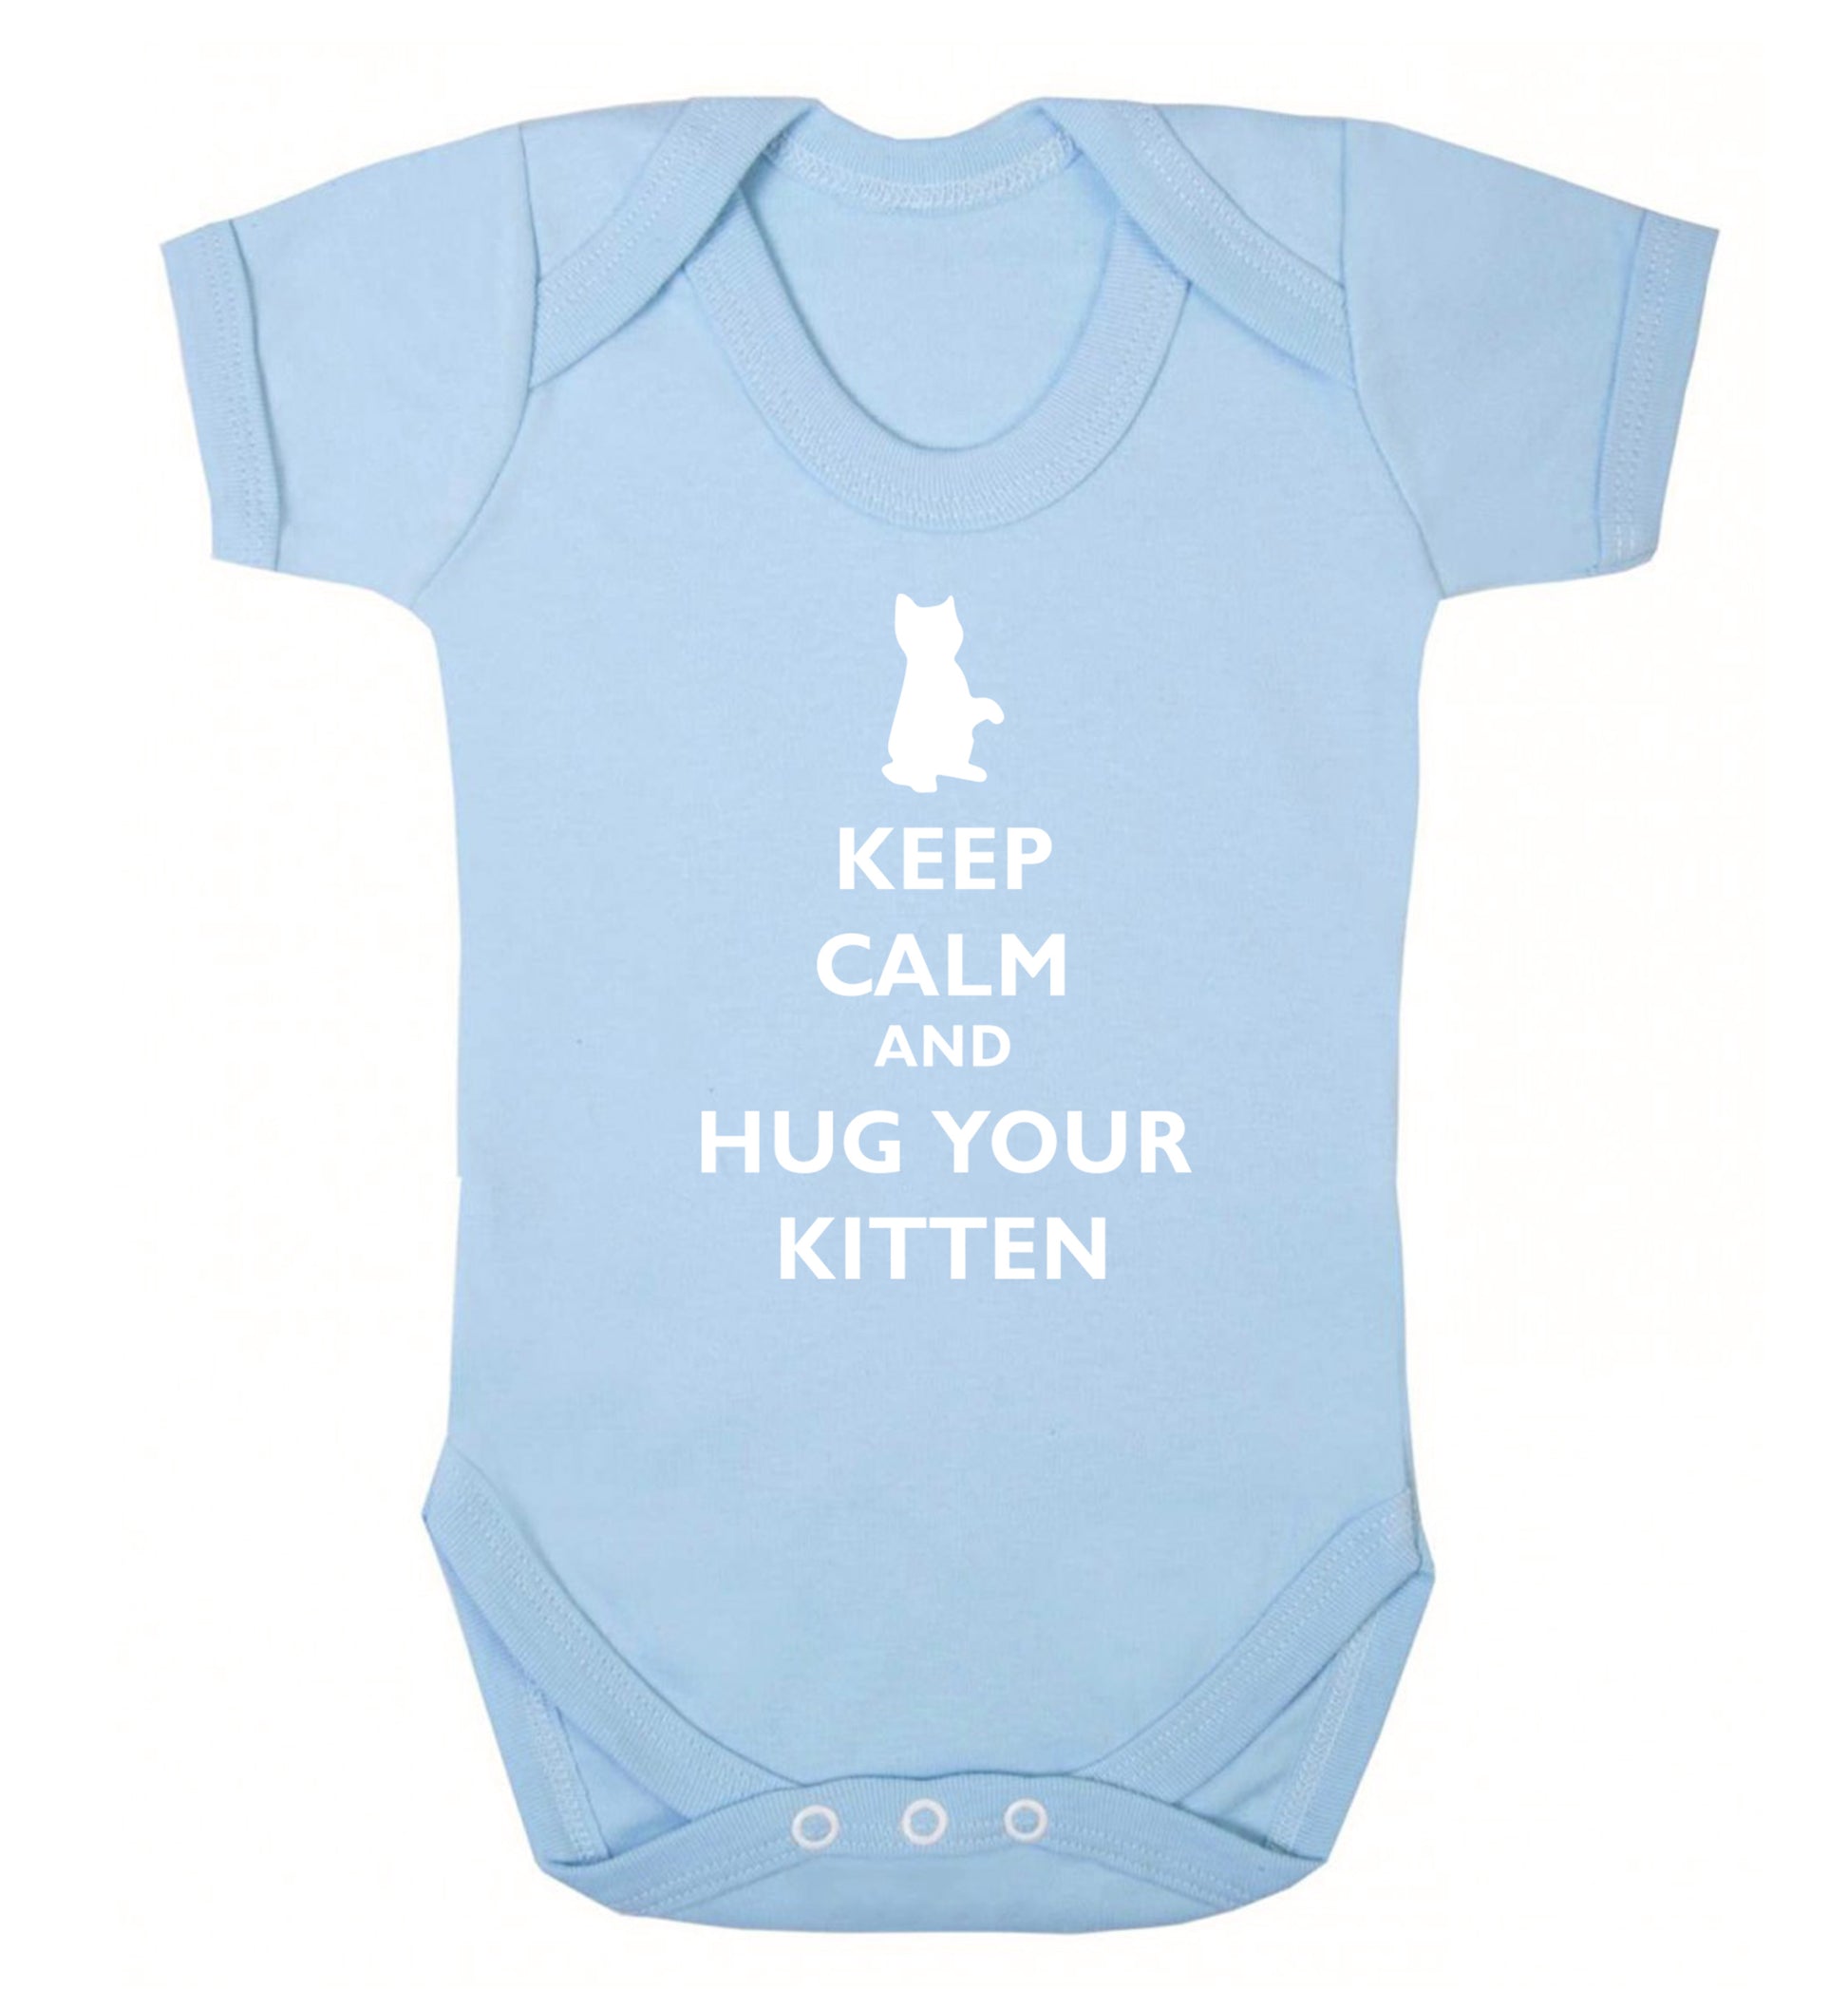 Keep calm and hug your kitten Baby Vest pale blue 18-24 months